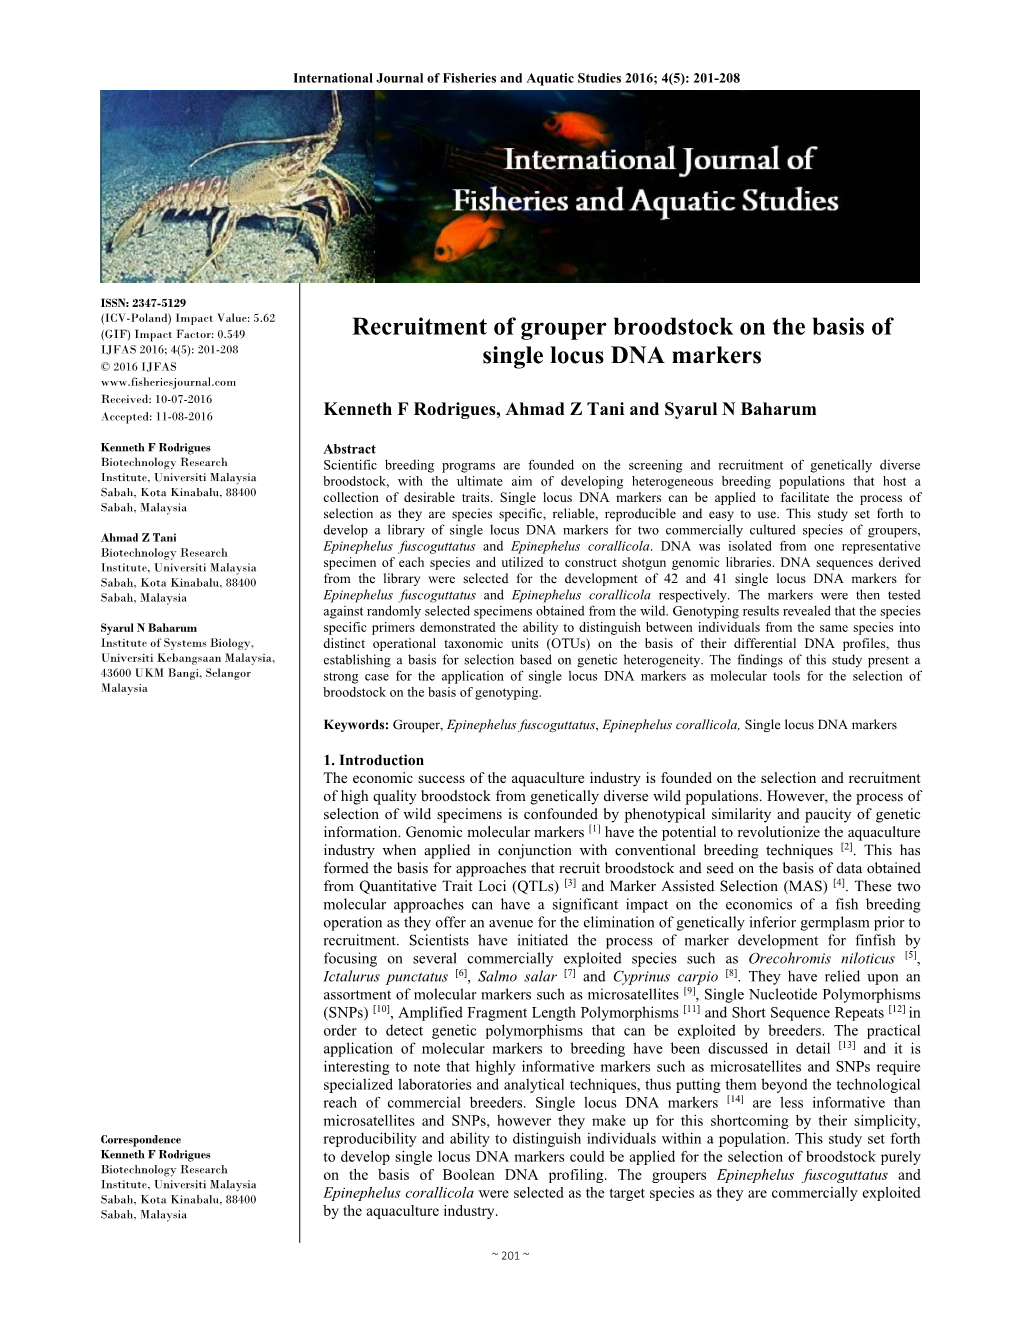 Recruitment of Grouper Broodstock on the Basis of Single Locus DNA Markers